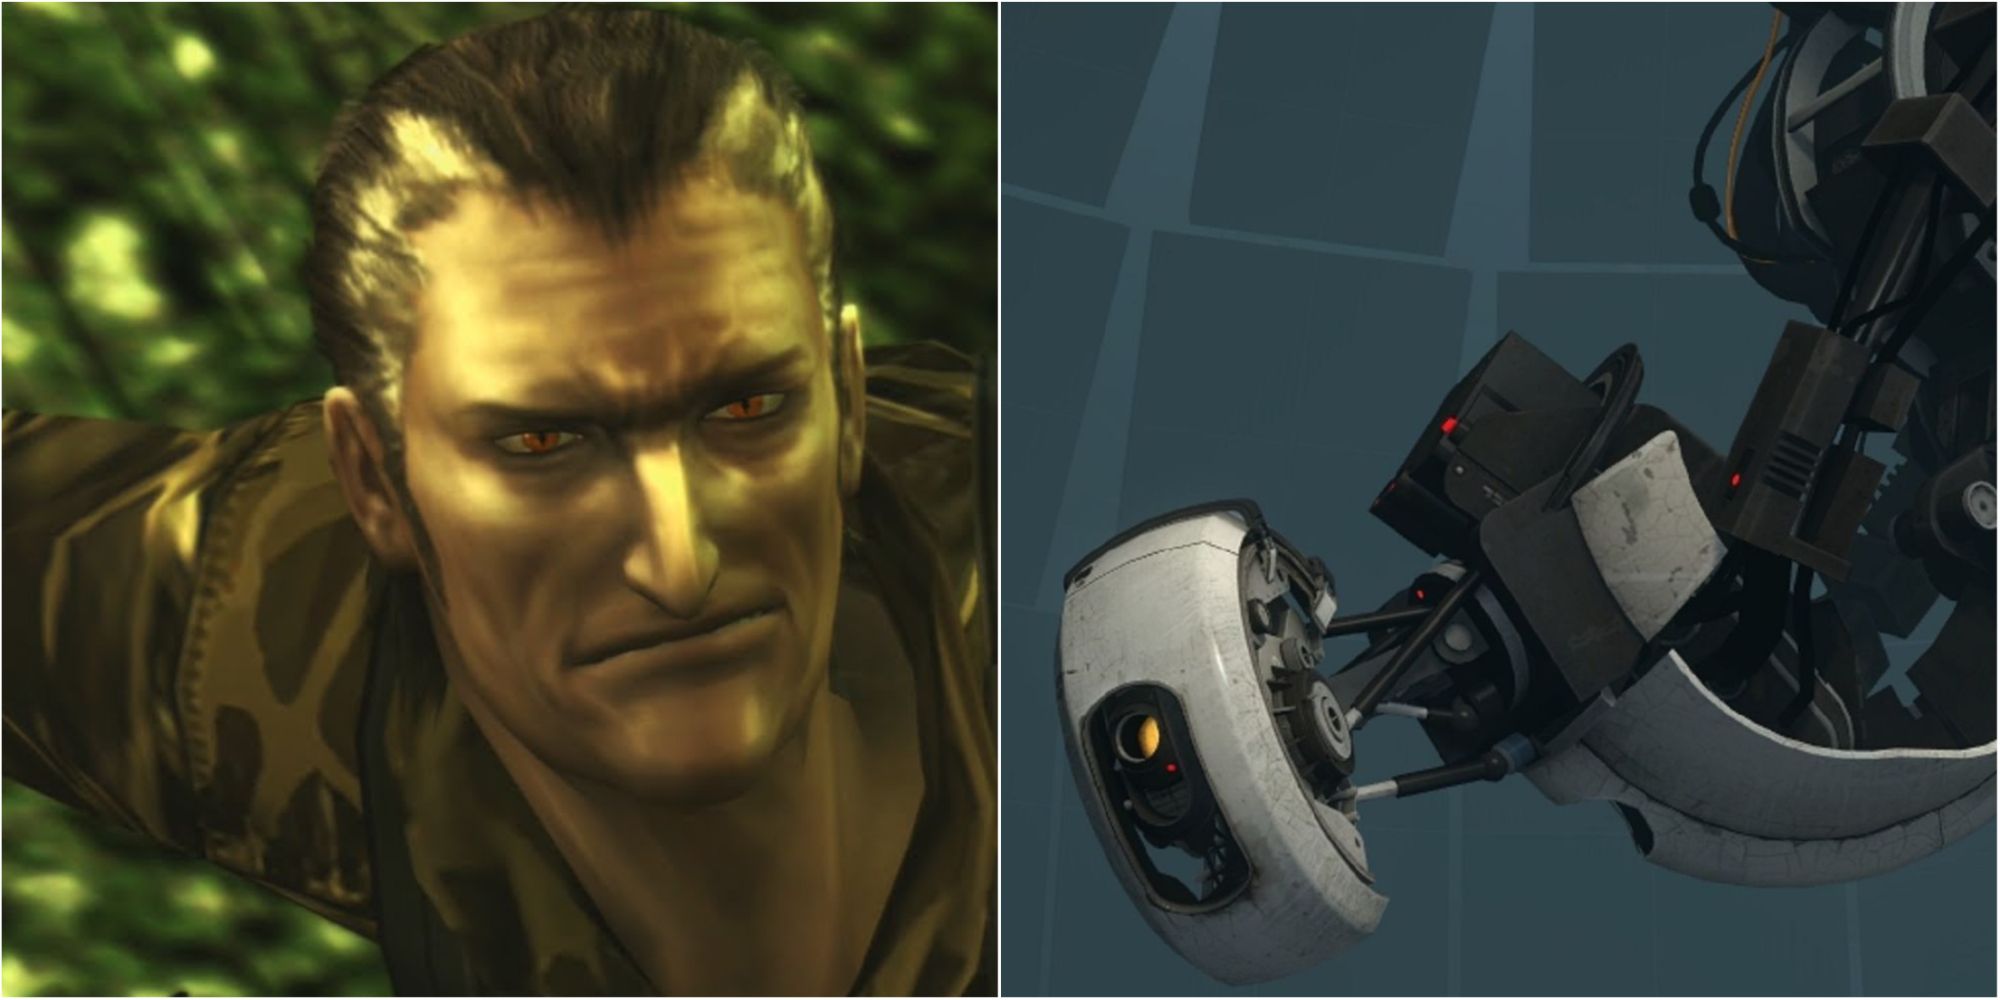 Video Game Poison Characters Featured Split Image The Fear and GlaDOS